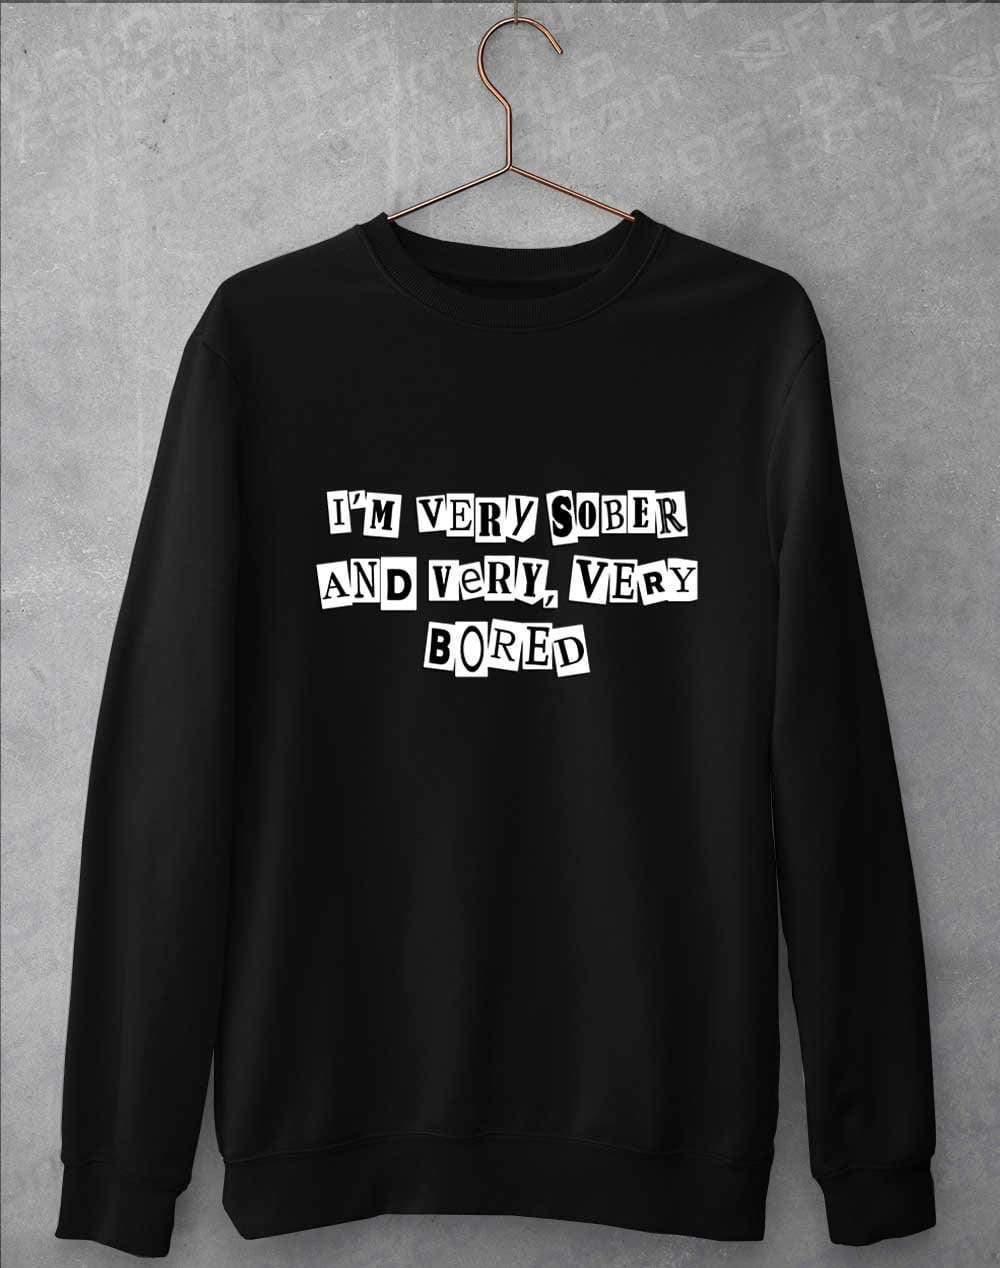 I'm Very Sober and Very Very Bored Sweatshirt S / Jet Black  - Off World Tees